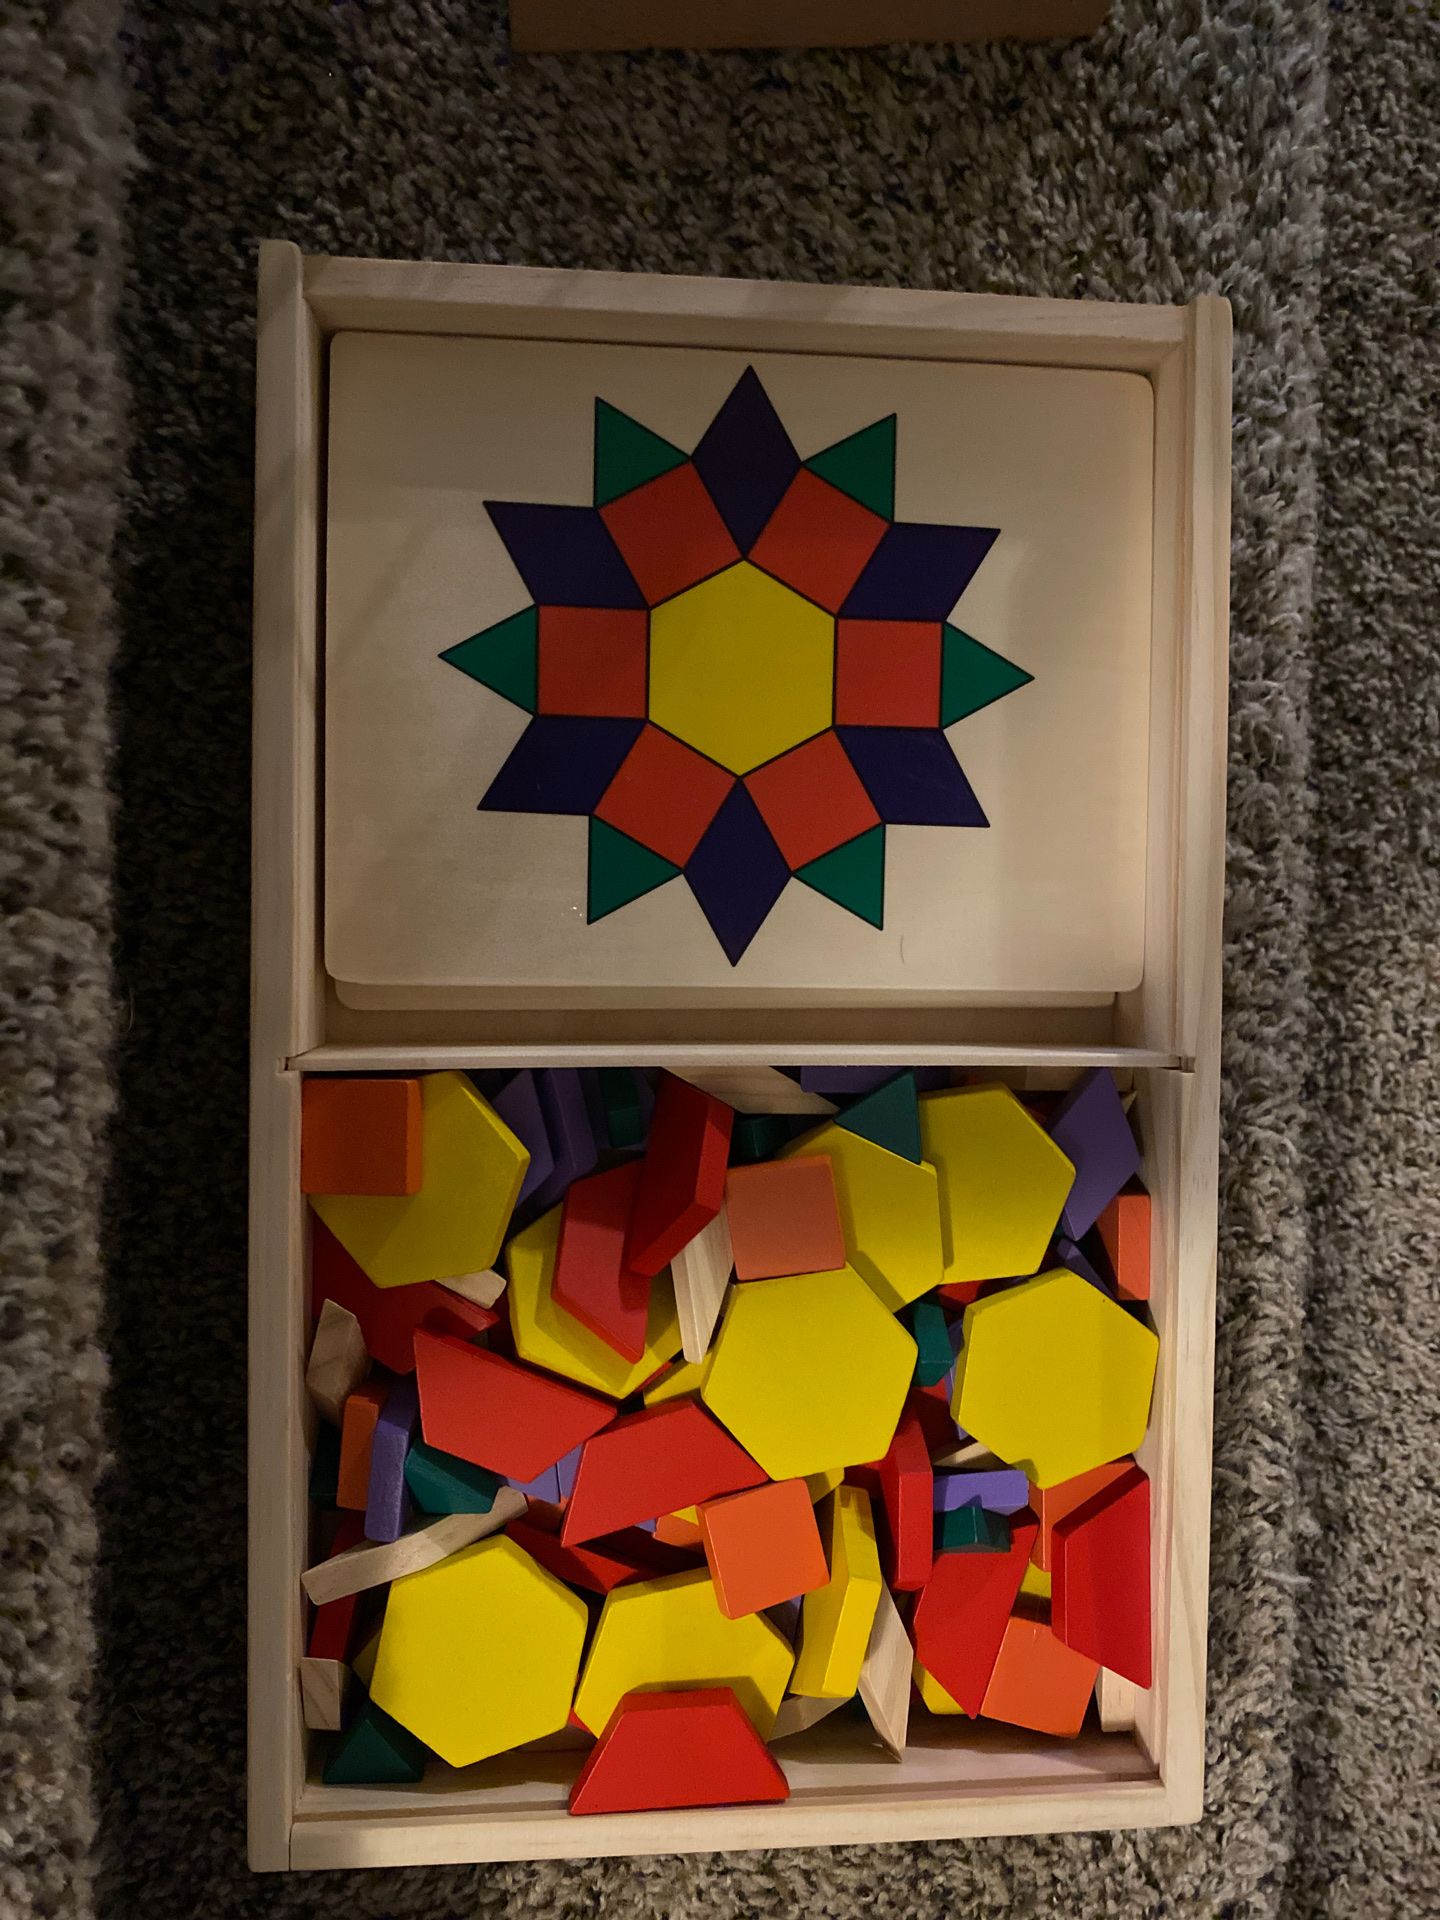 Geometric shape puzzles and wooden game